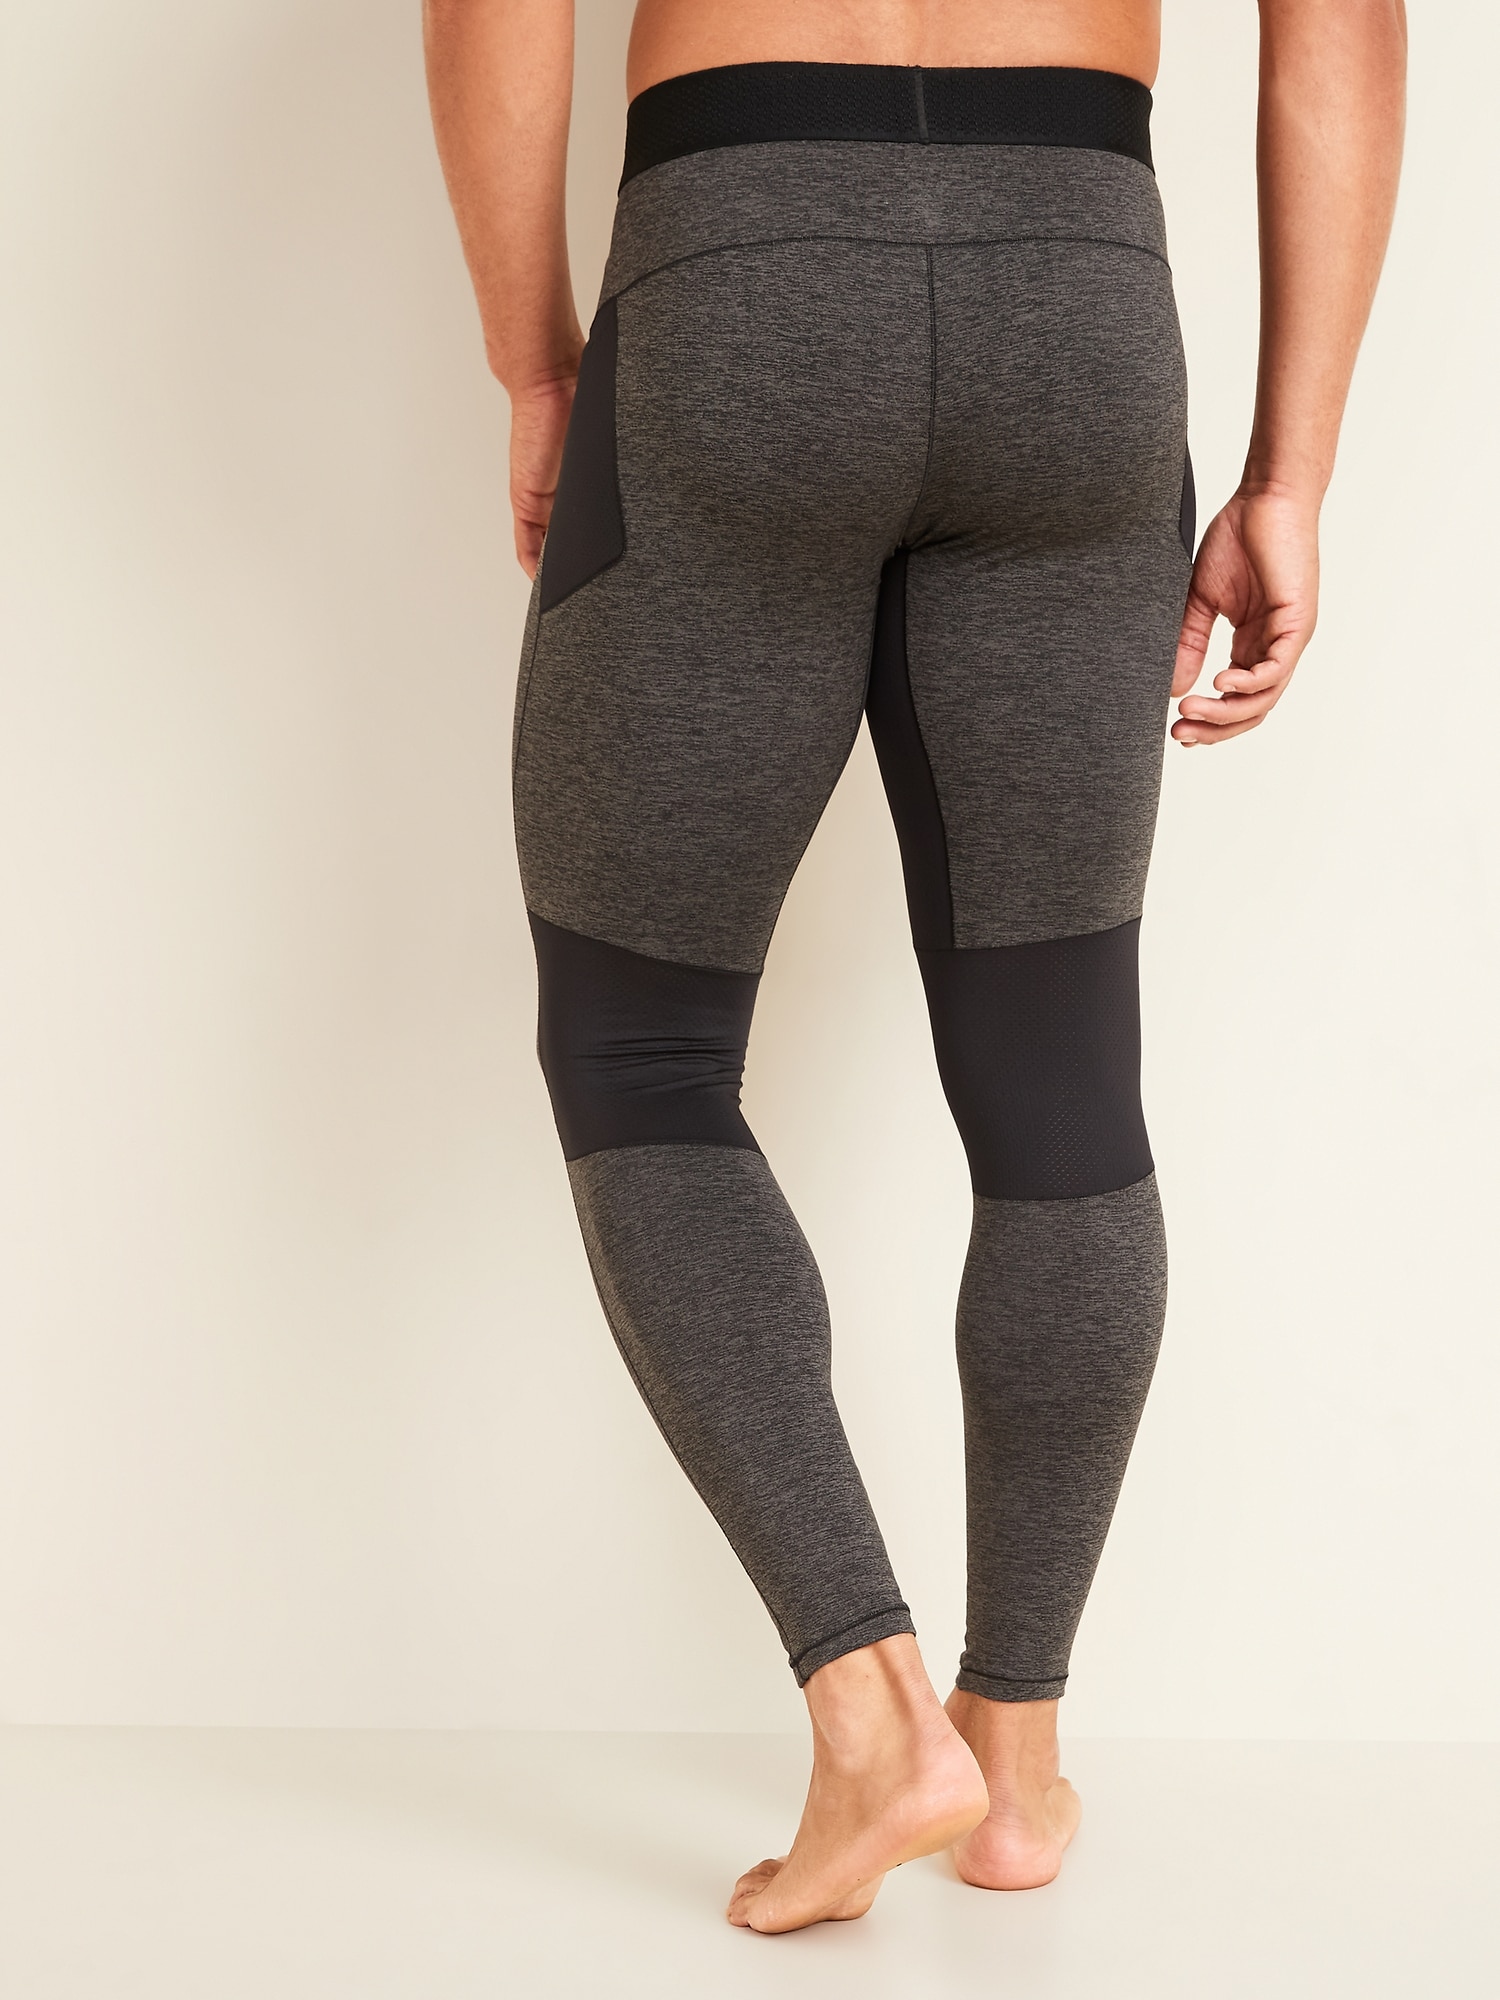 PACT Women's Mountain View Heather On the Go-To Legging XS